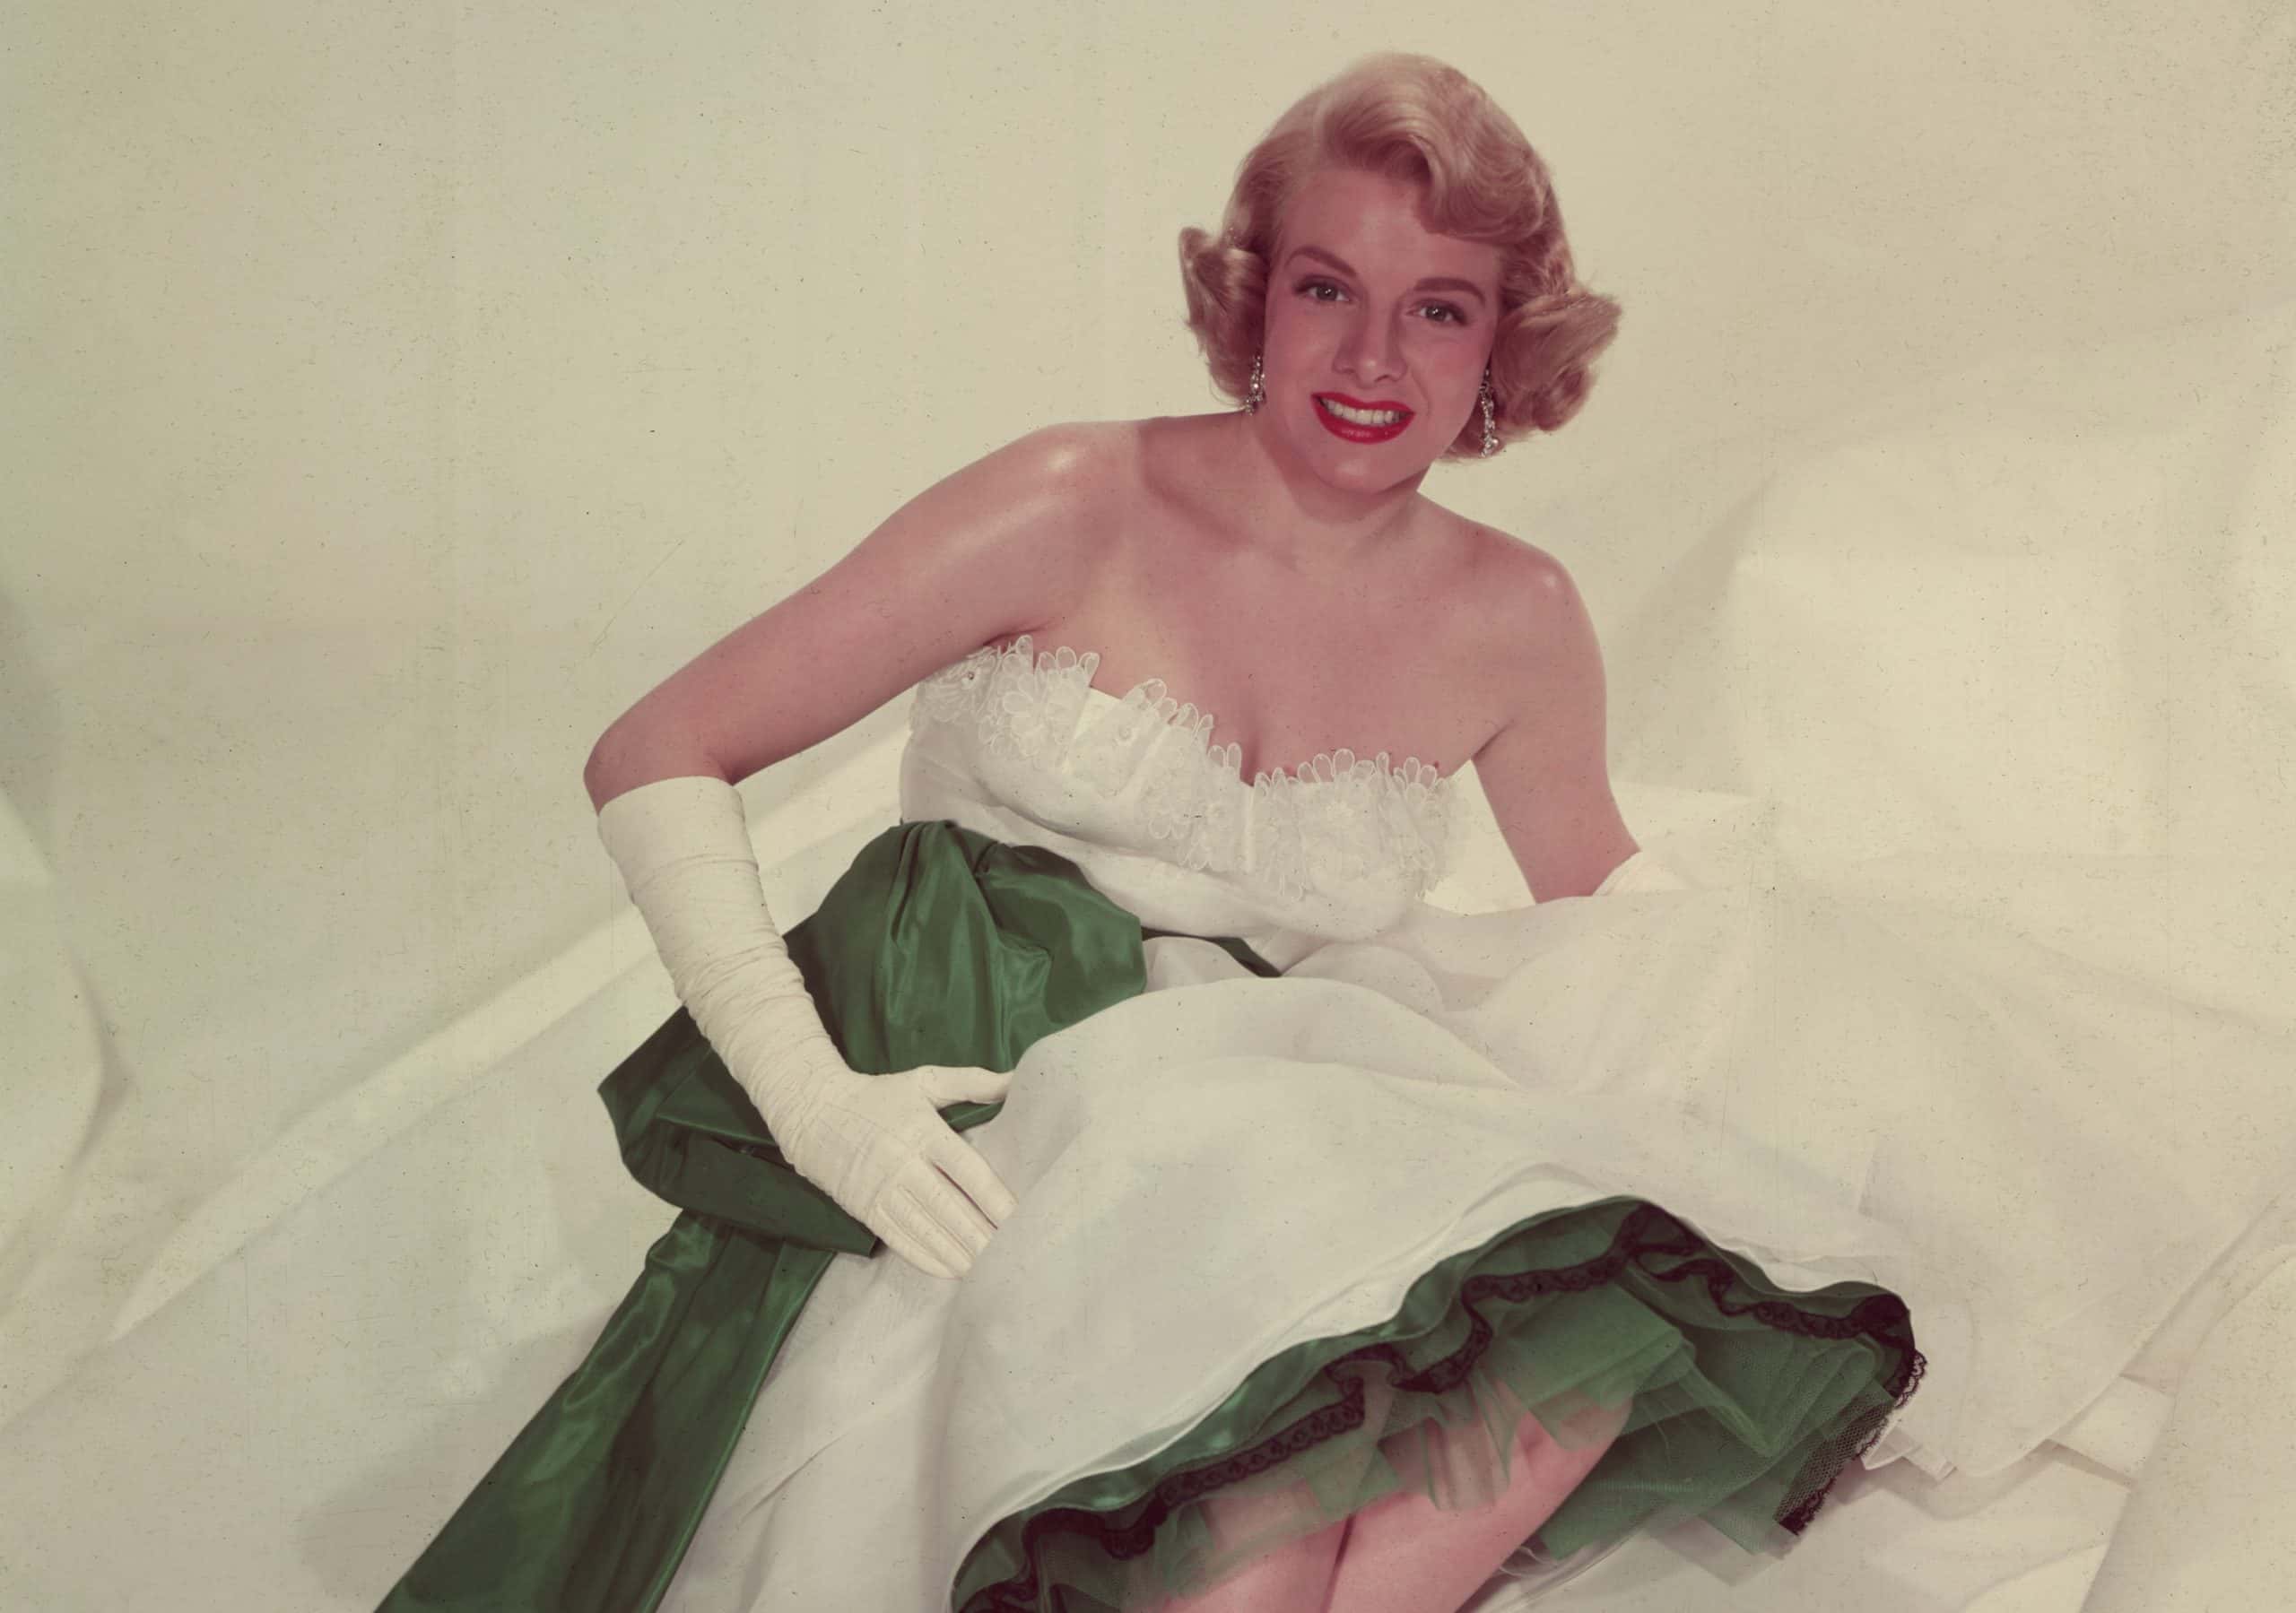 Rosemary Clooney Facts